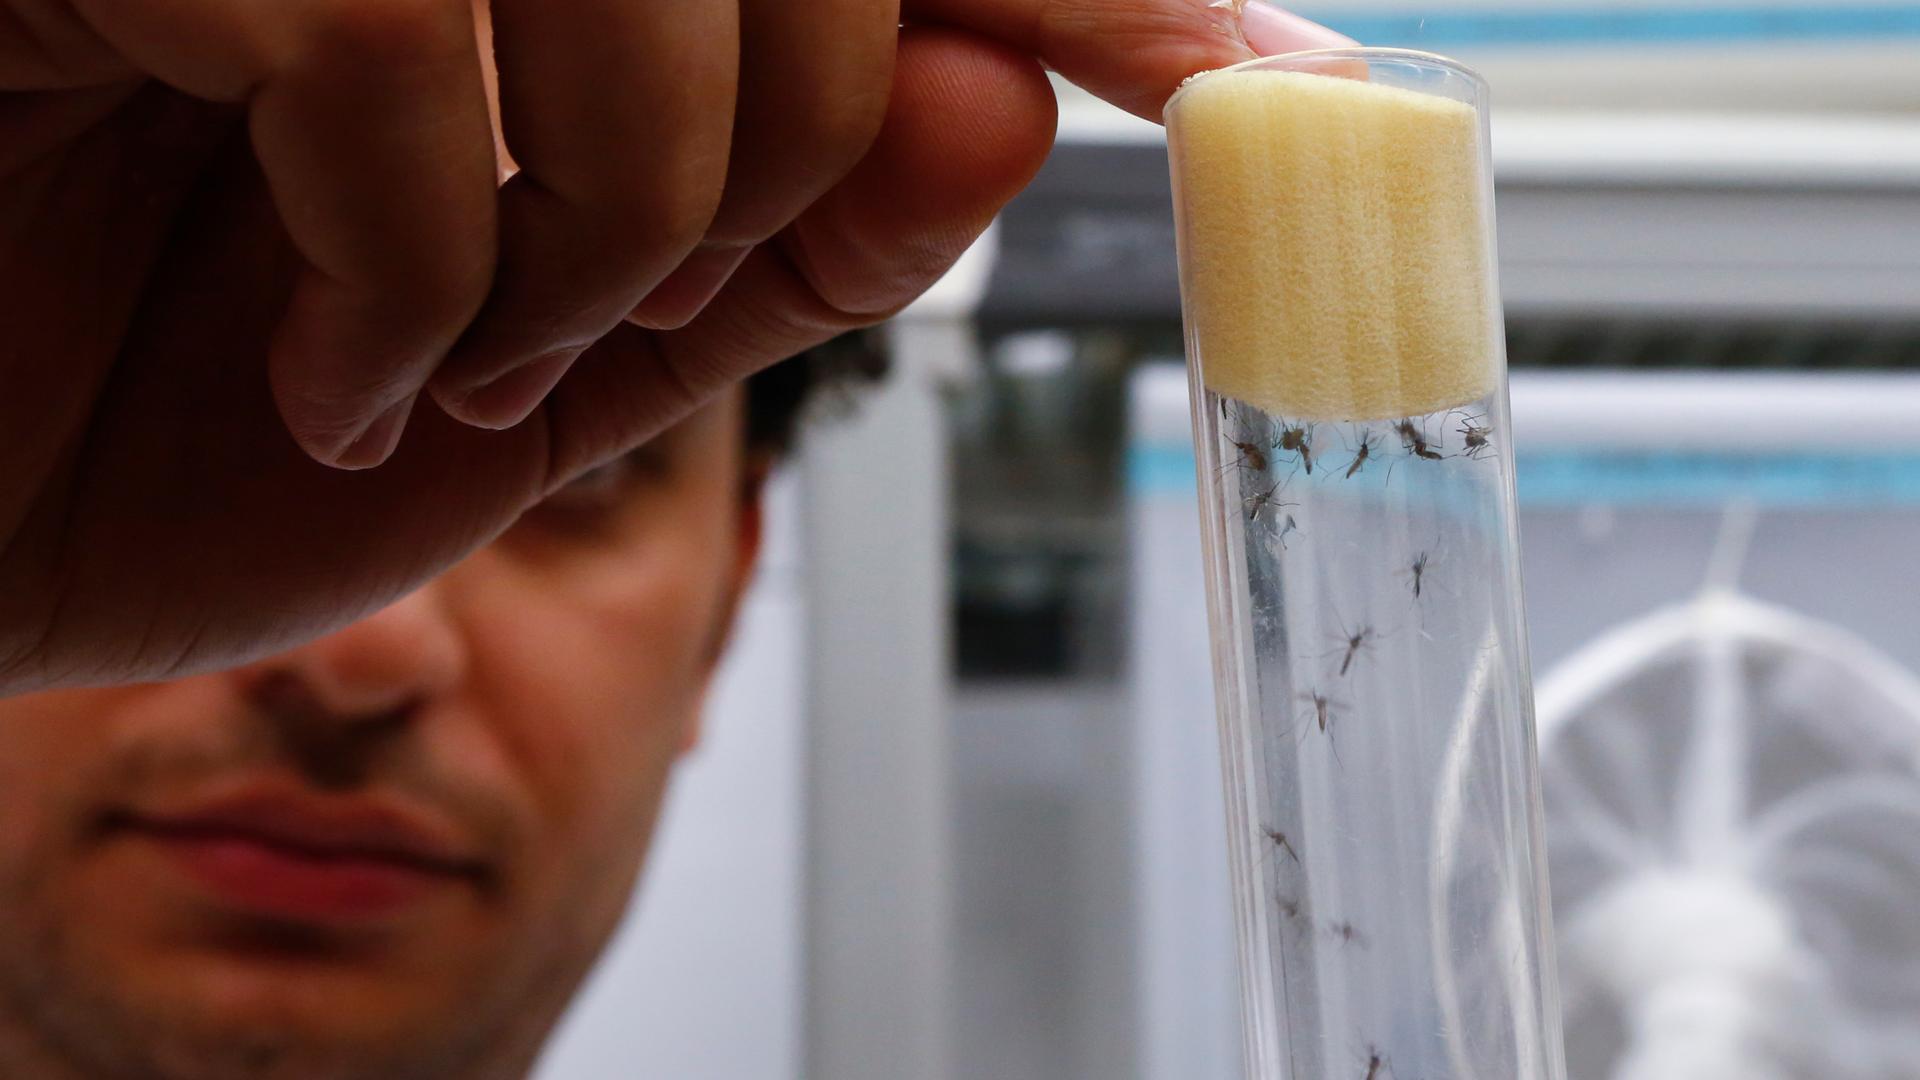 A scientist displays Aedes aegypti mosquitoes inside the International Atomic Energy Agency's insect pest control laboratory, Austria.